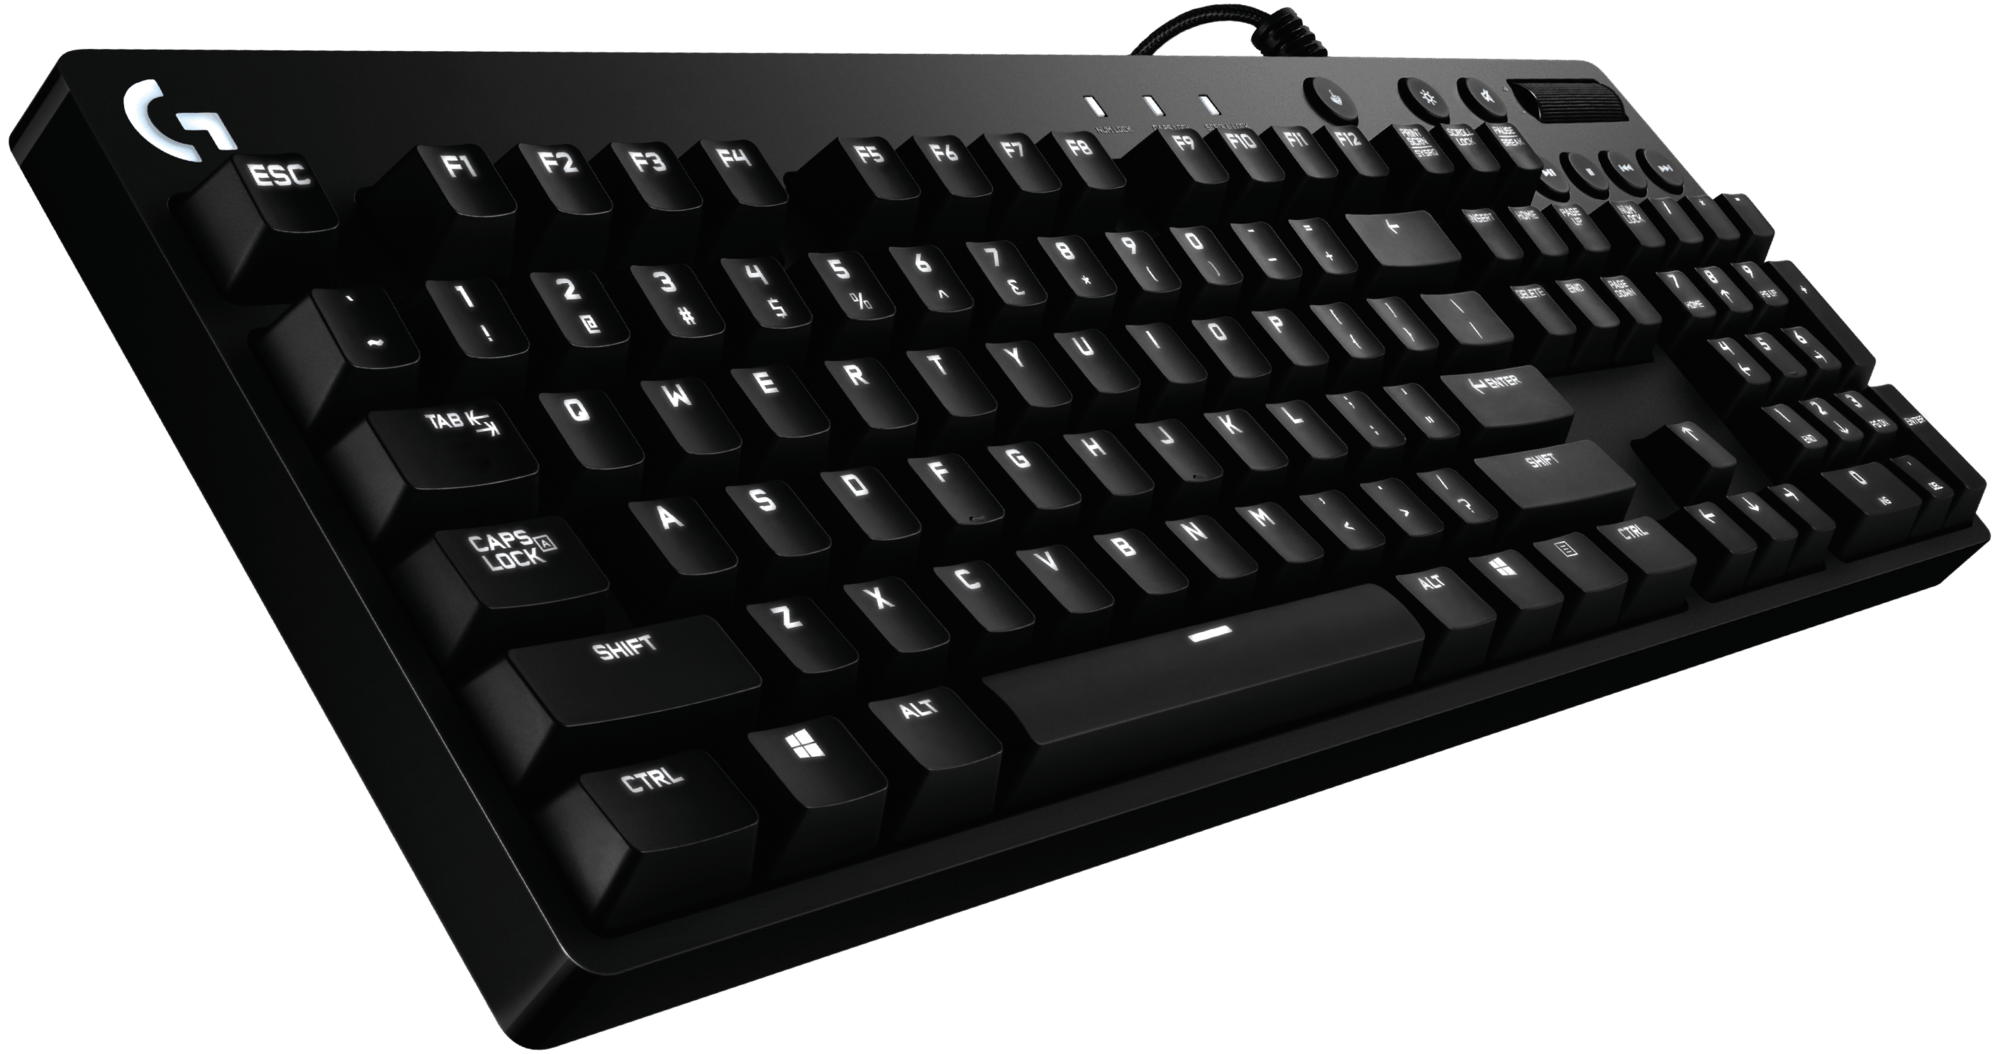 Logitech’s G610 With Cherry Red Switches Can Be Bought For Only $60 In Amazon But For Today Only!